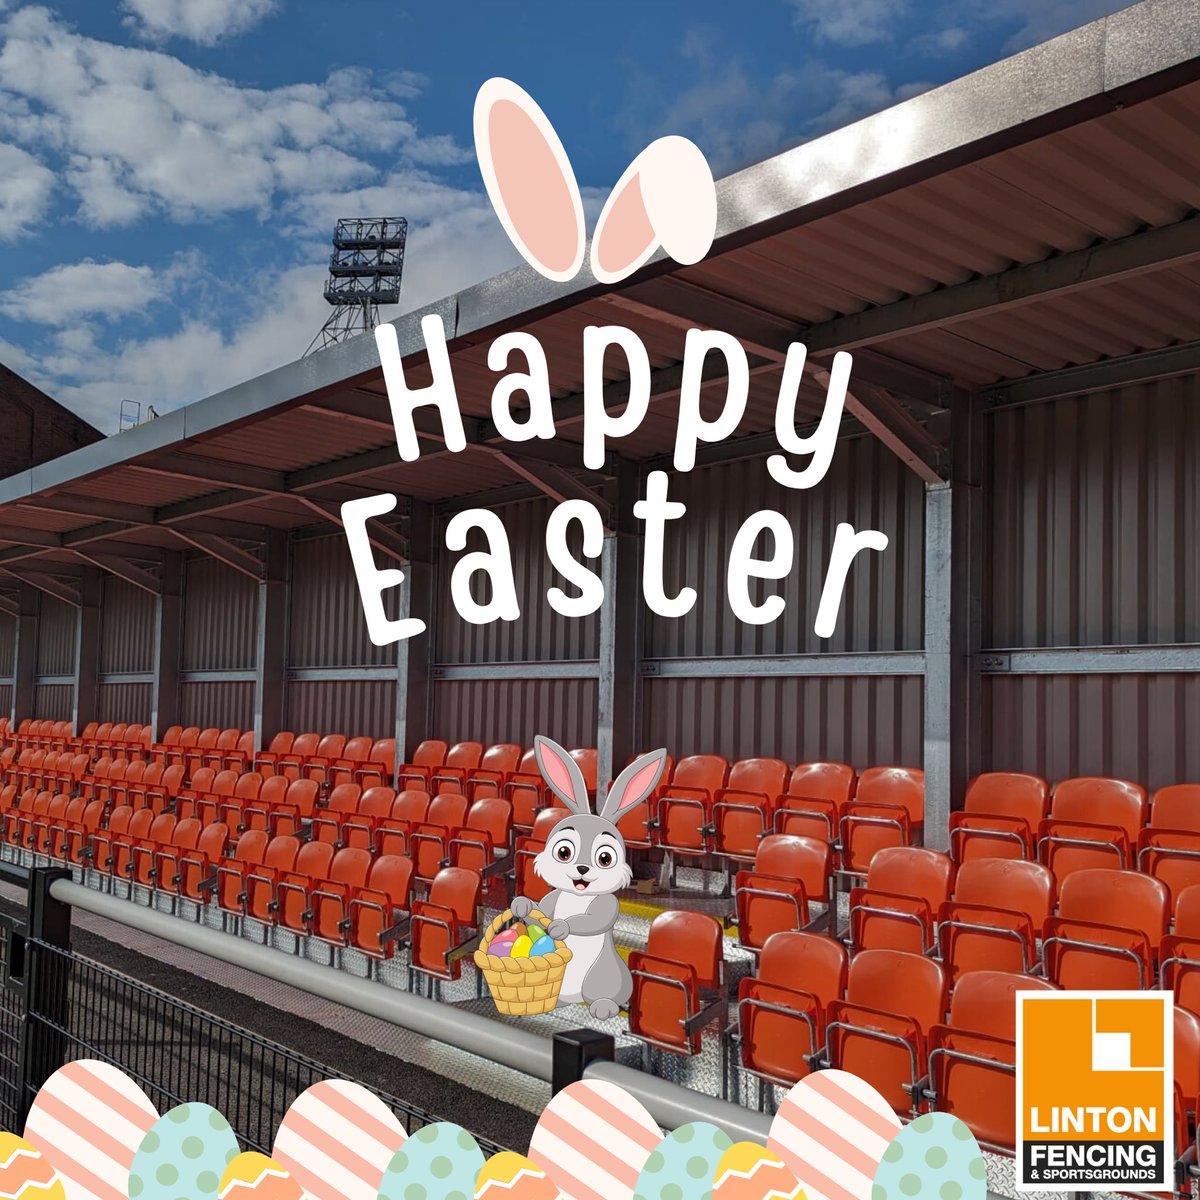 🐣 A very Happy Easter to all of our clubs, customers, friends and colleagues 🐣

Plenty more to come in 2024! Enjoy the break 😊

#sportsclubs #nibusiness #fencing #stadium #stands